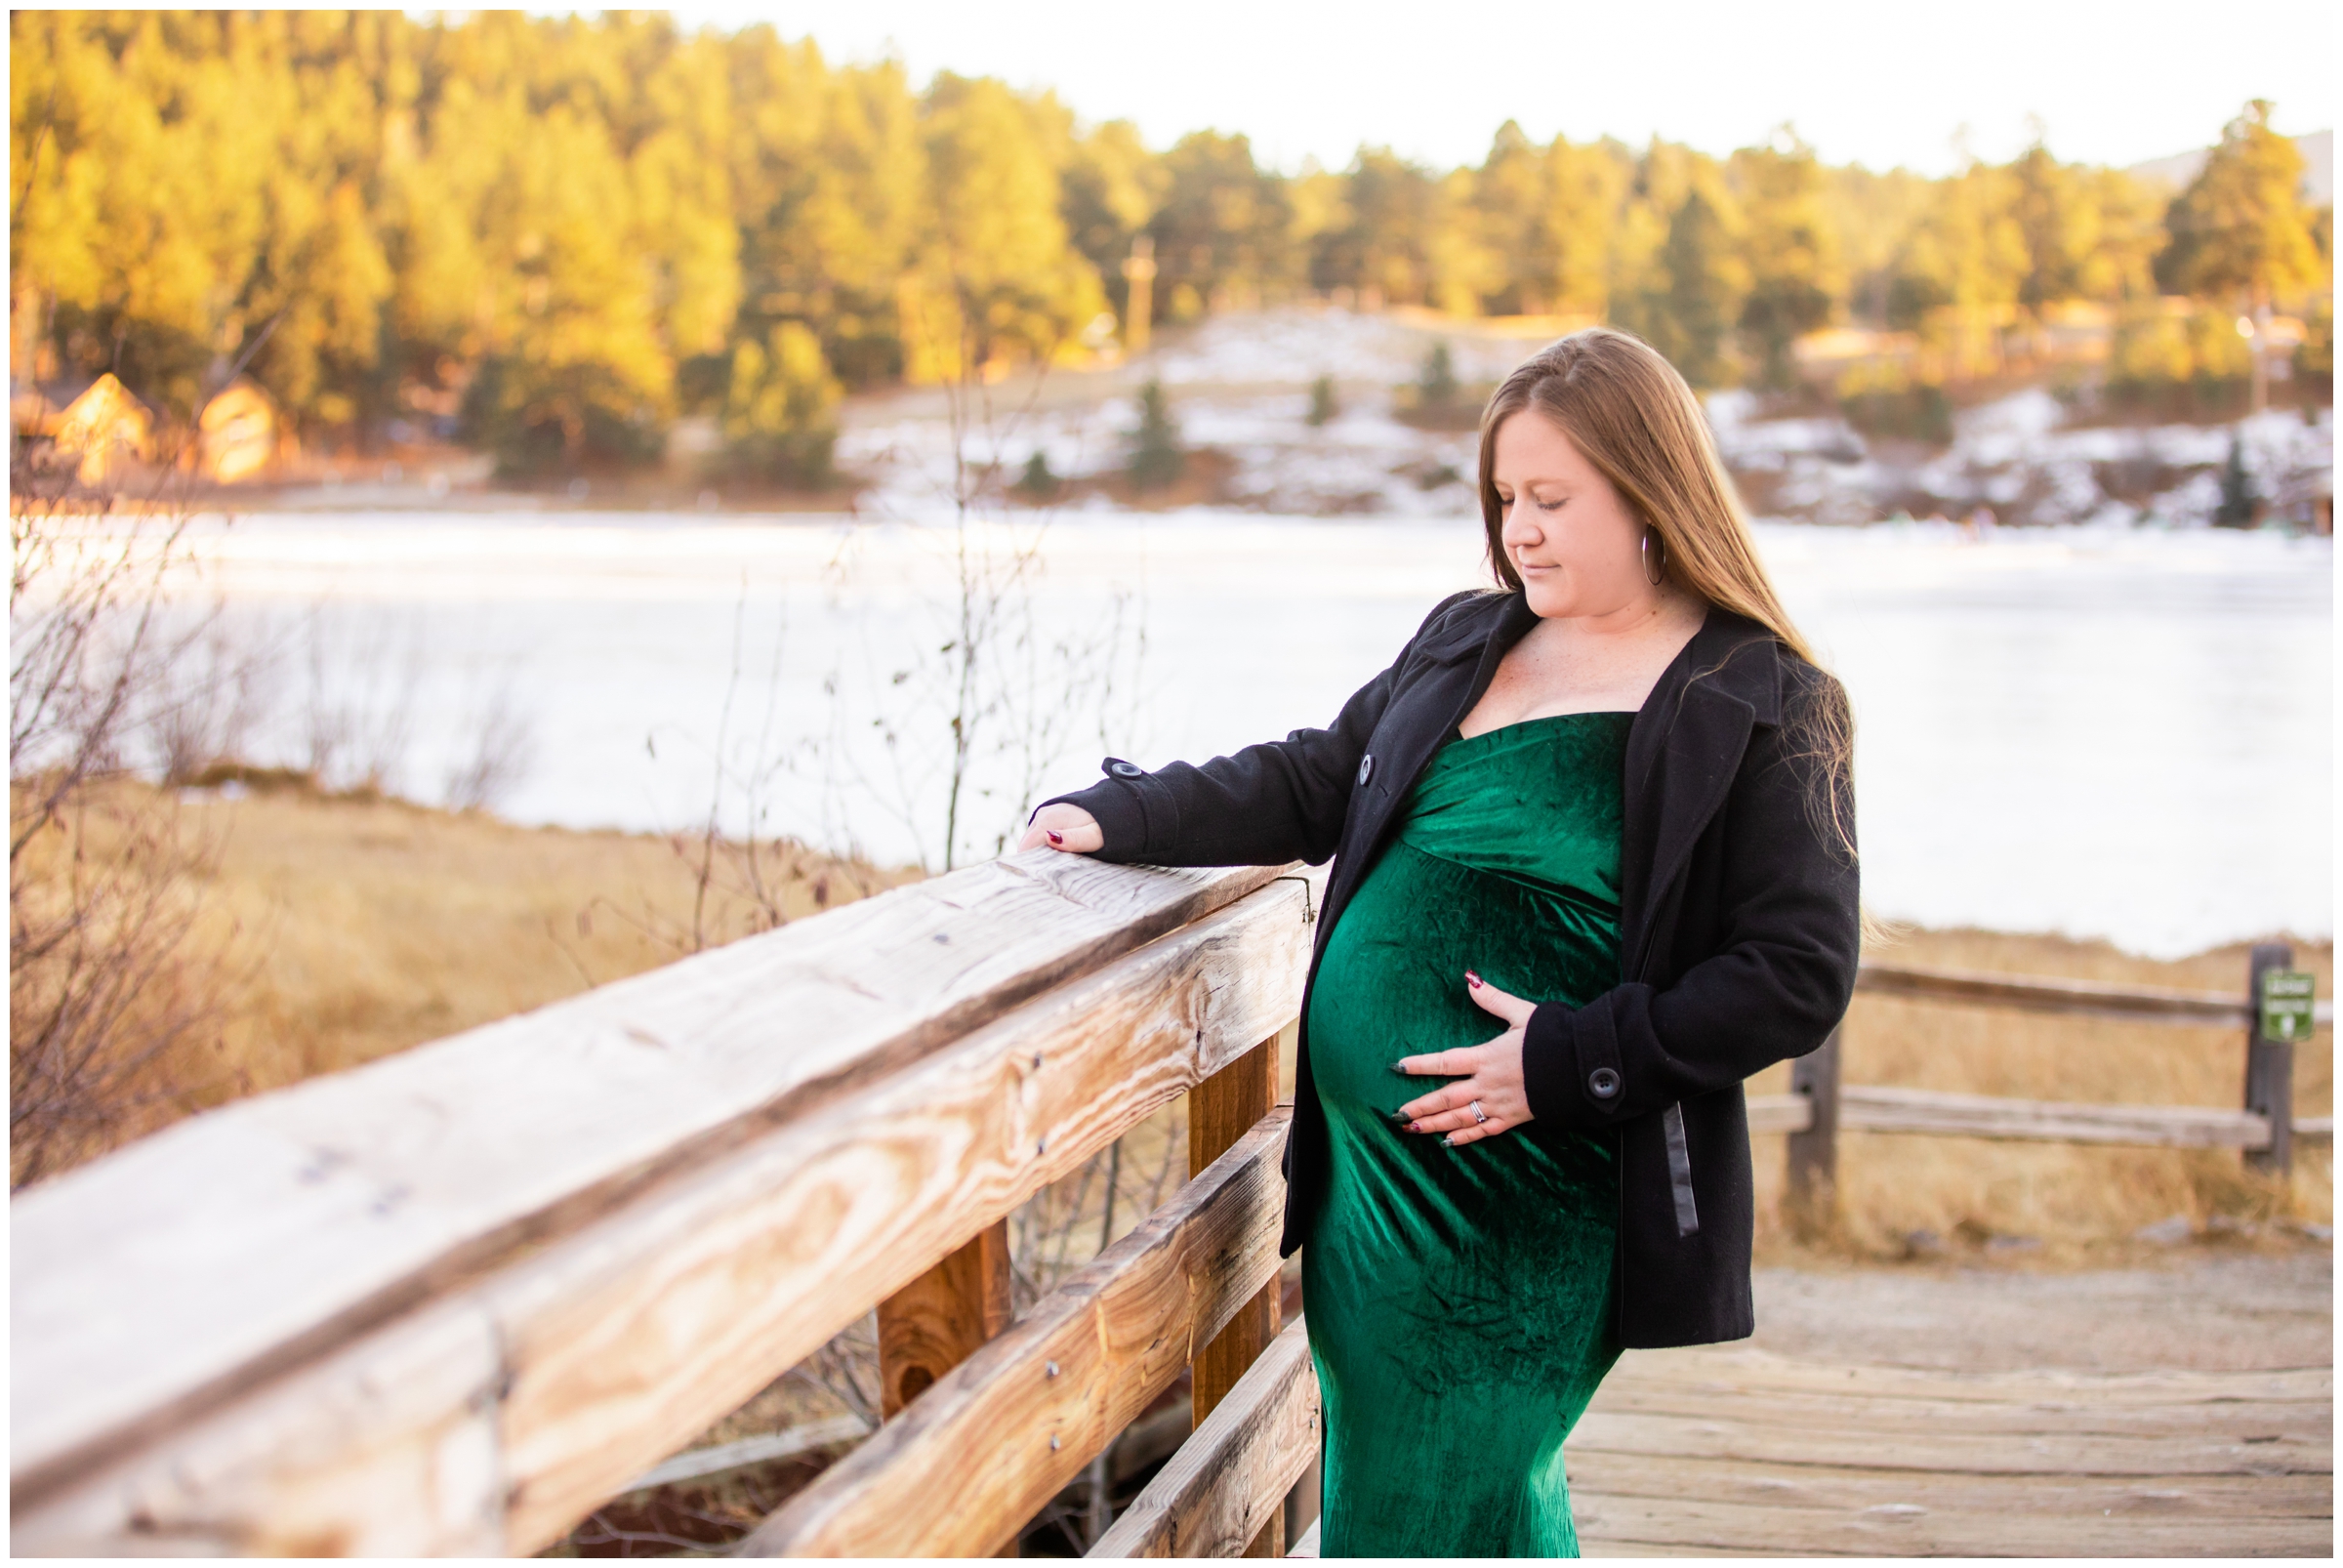 Evergreen Colorado maternity pictures at Evergreen Lake House by portrait photographer Plum Pretty Photography